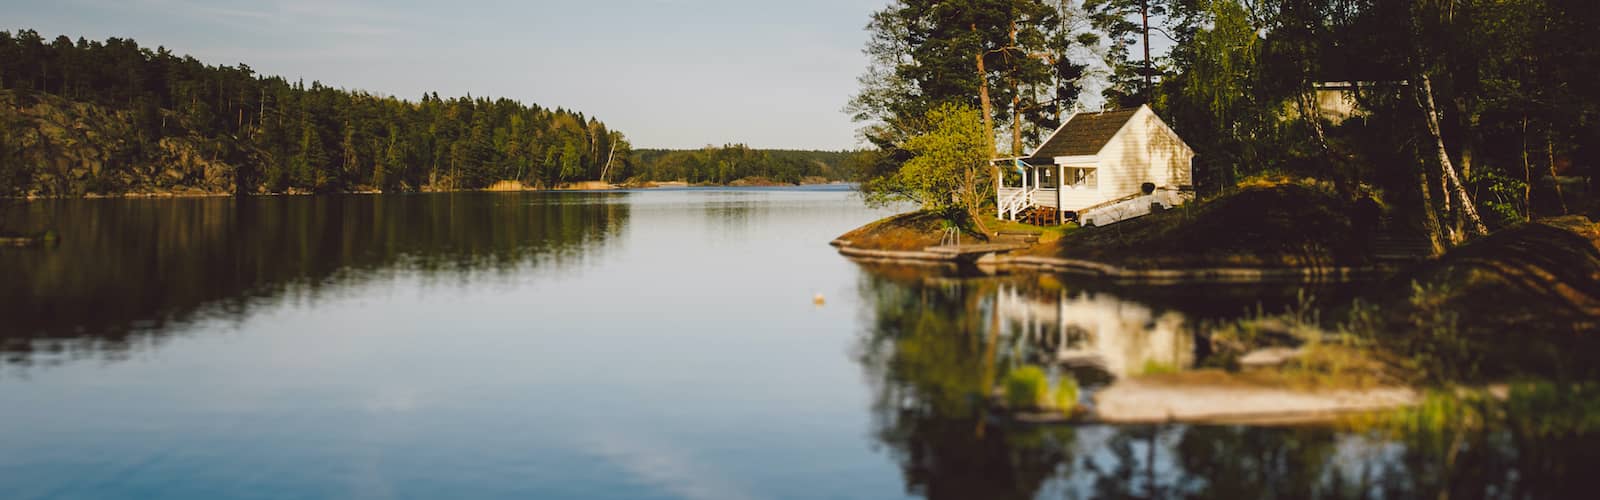 The Pros And Cons Of Buying A Lake House | Rocket Mortgage